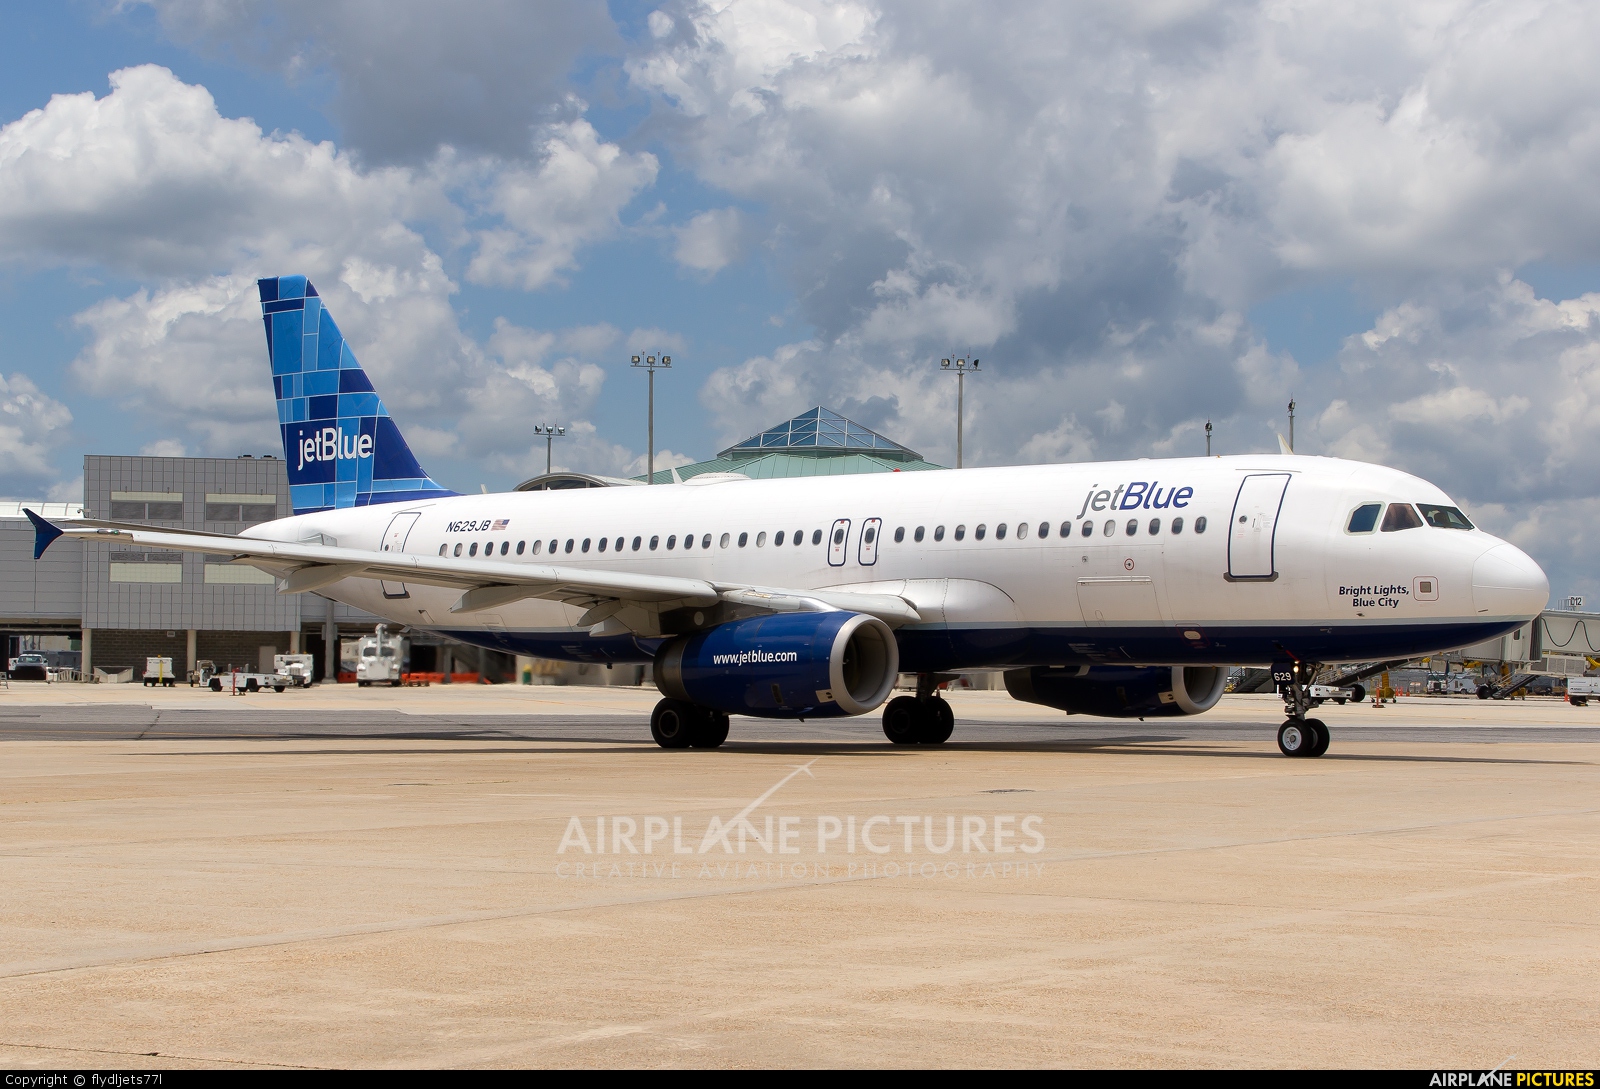 N629JB - JetBlue Airways Airbus A320 at New Orleans - Louis Armstrong Intl | Photo ID ...1600 x 1089